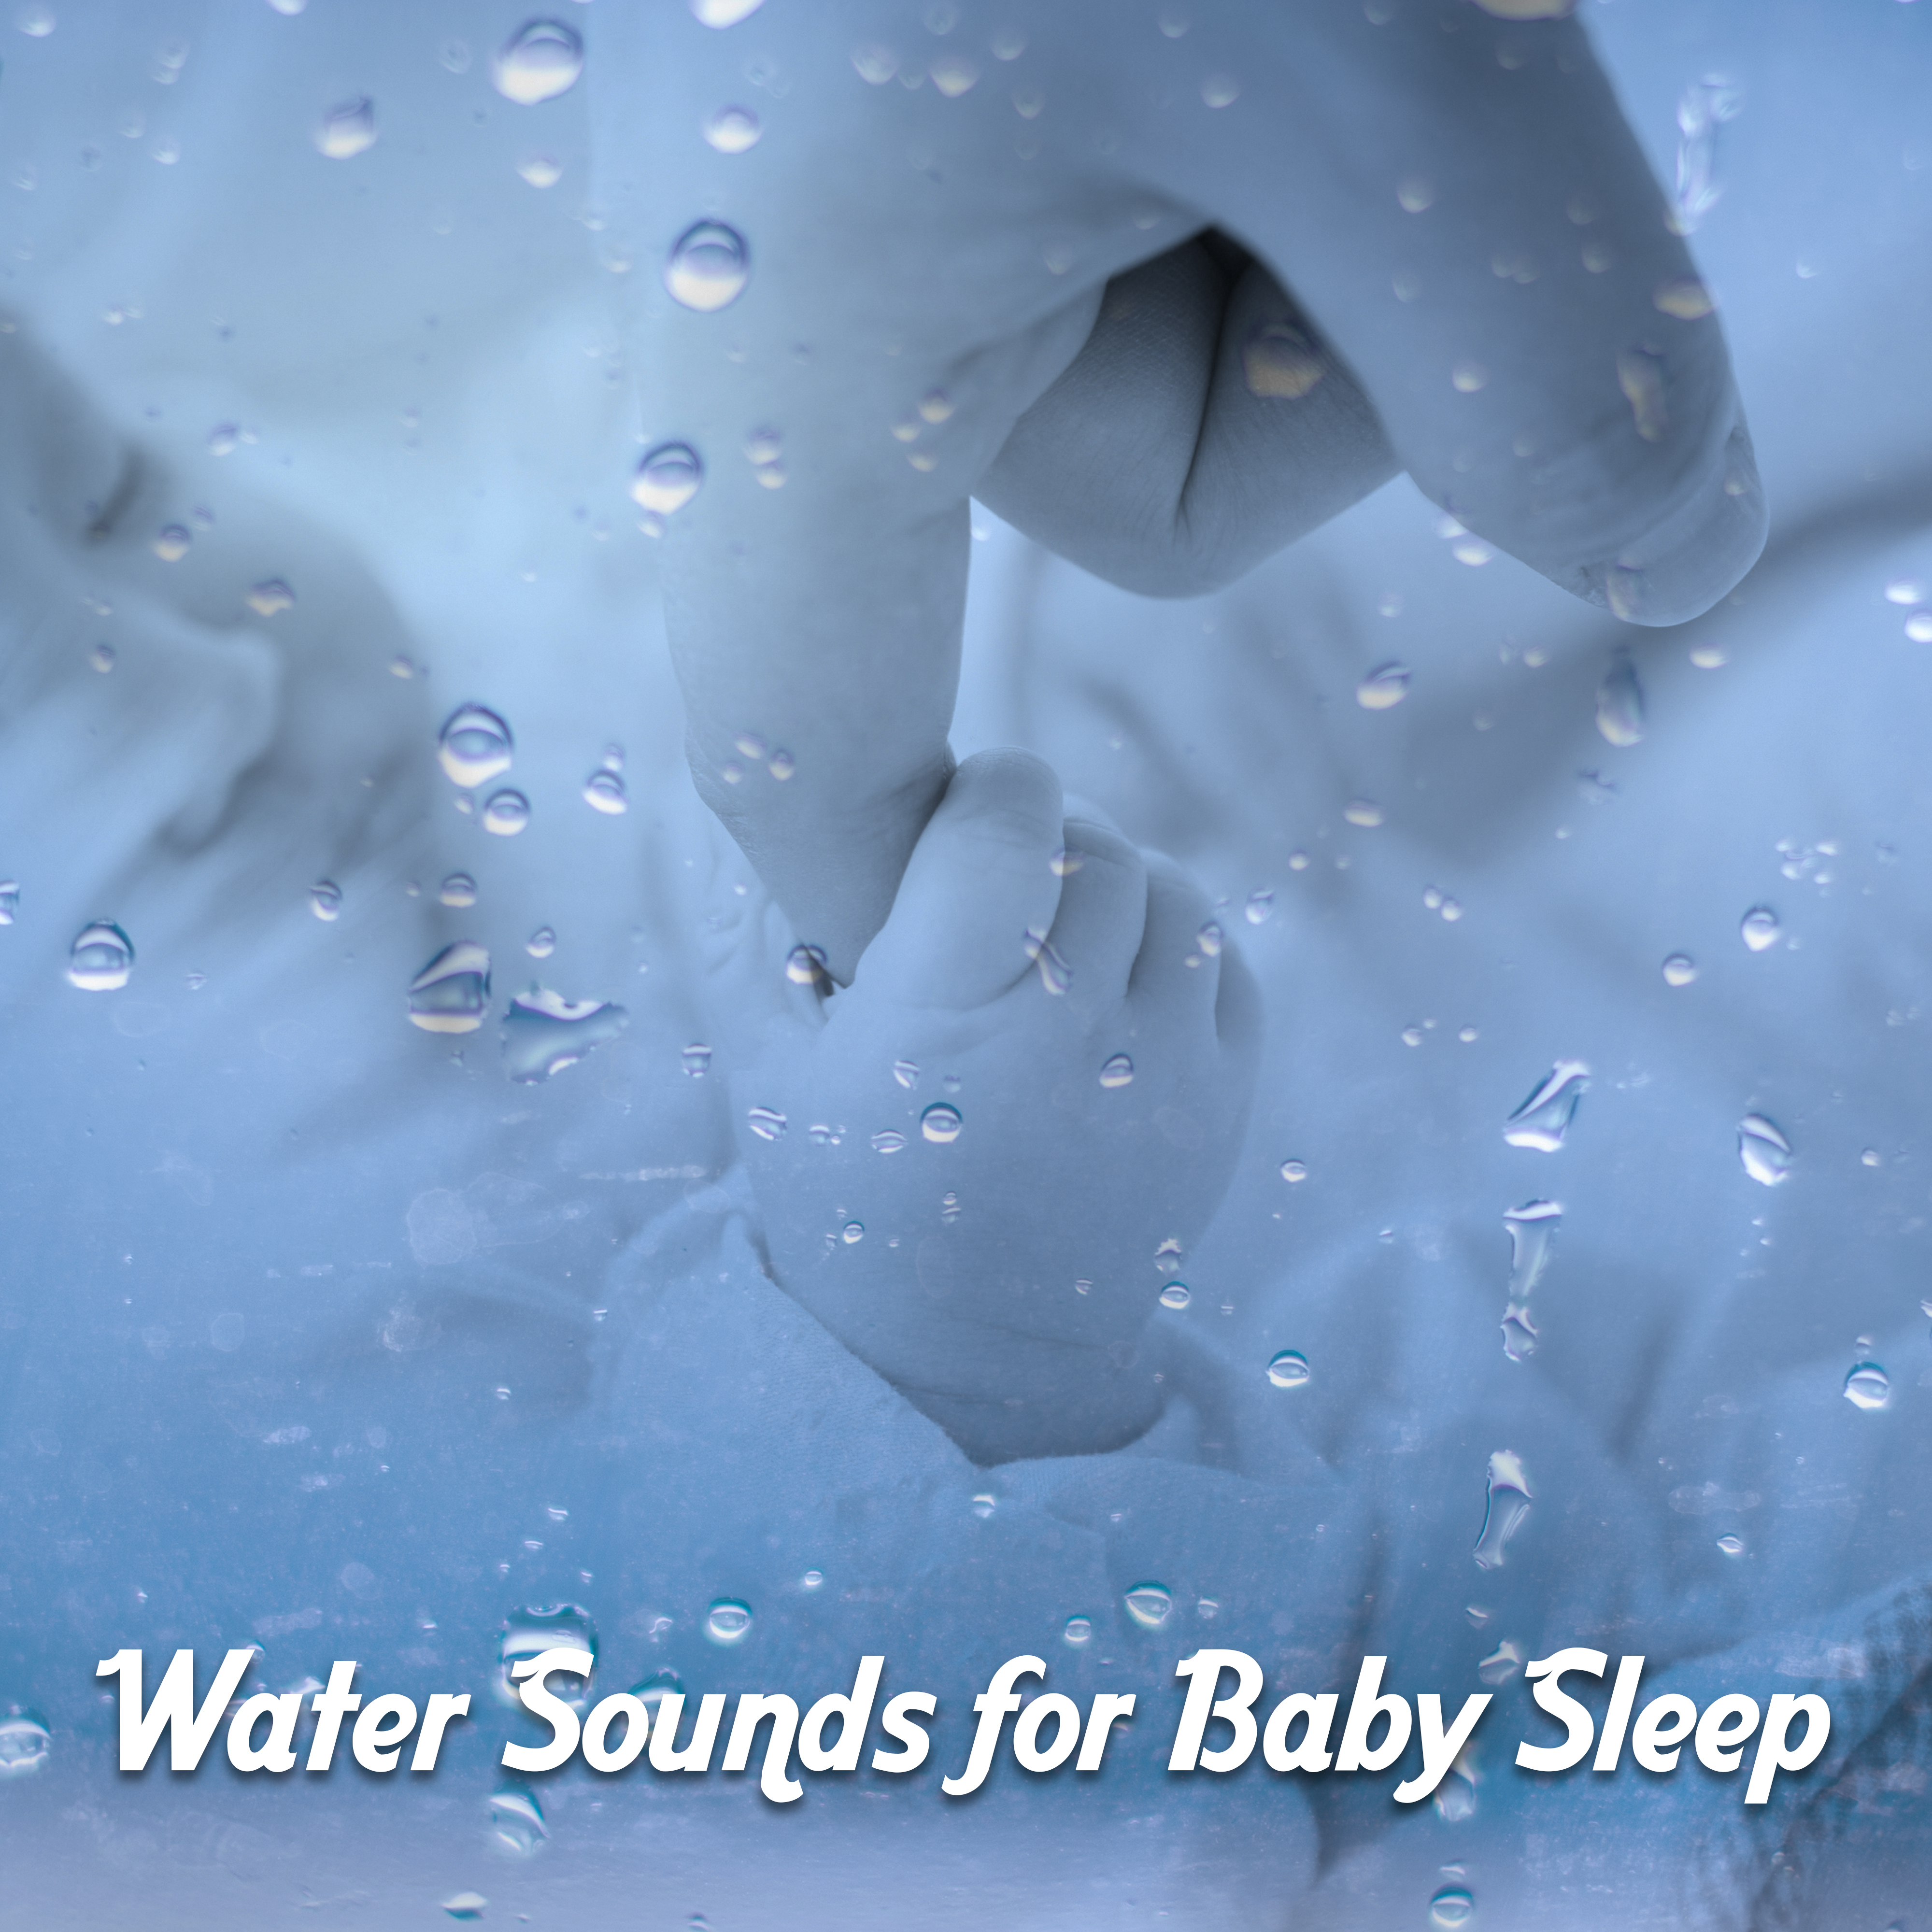 Water Sounds for Baby Sleep  Calming Sounds of Water, Helpful for Calm Down Baby and Easily Falling Asleep, Lullabies, Baby Music